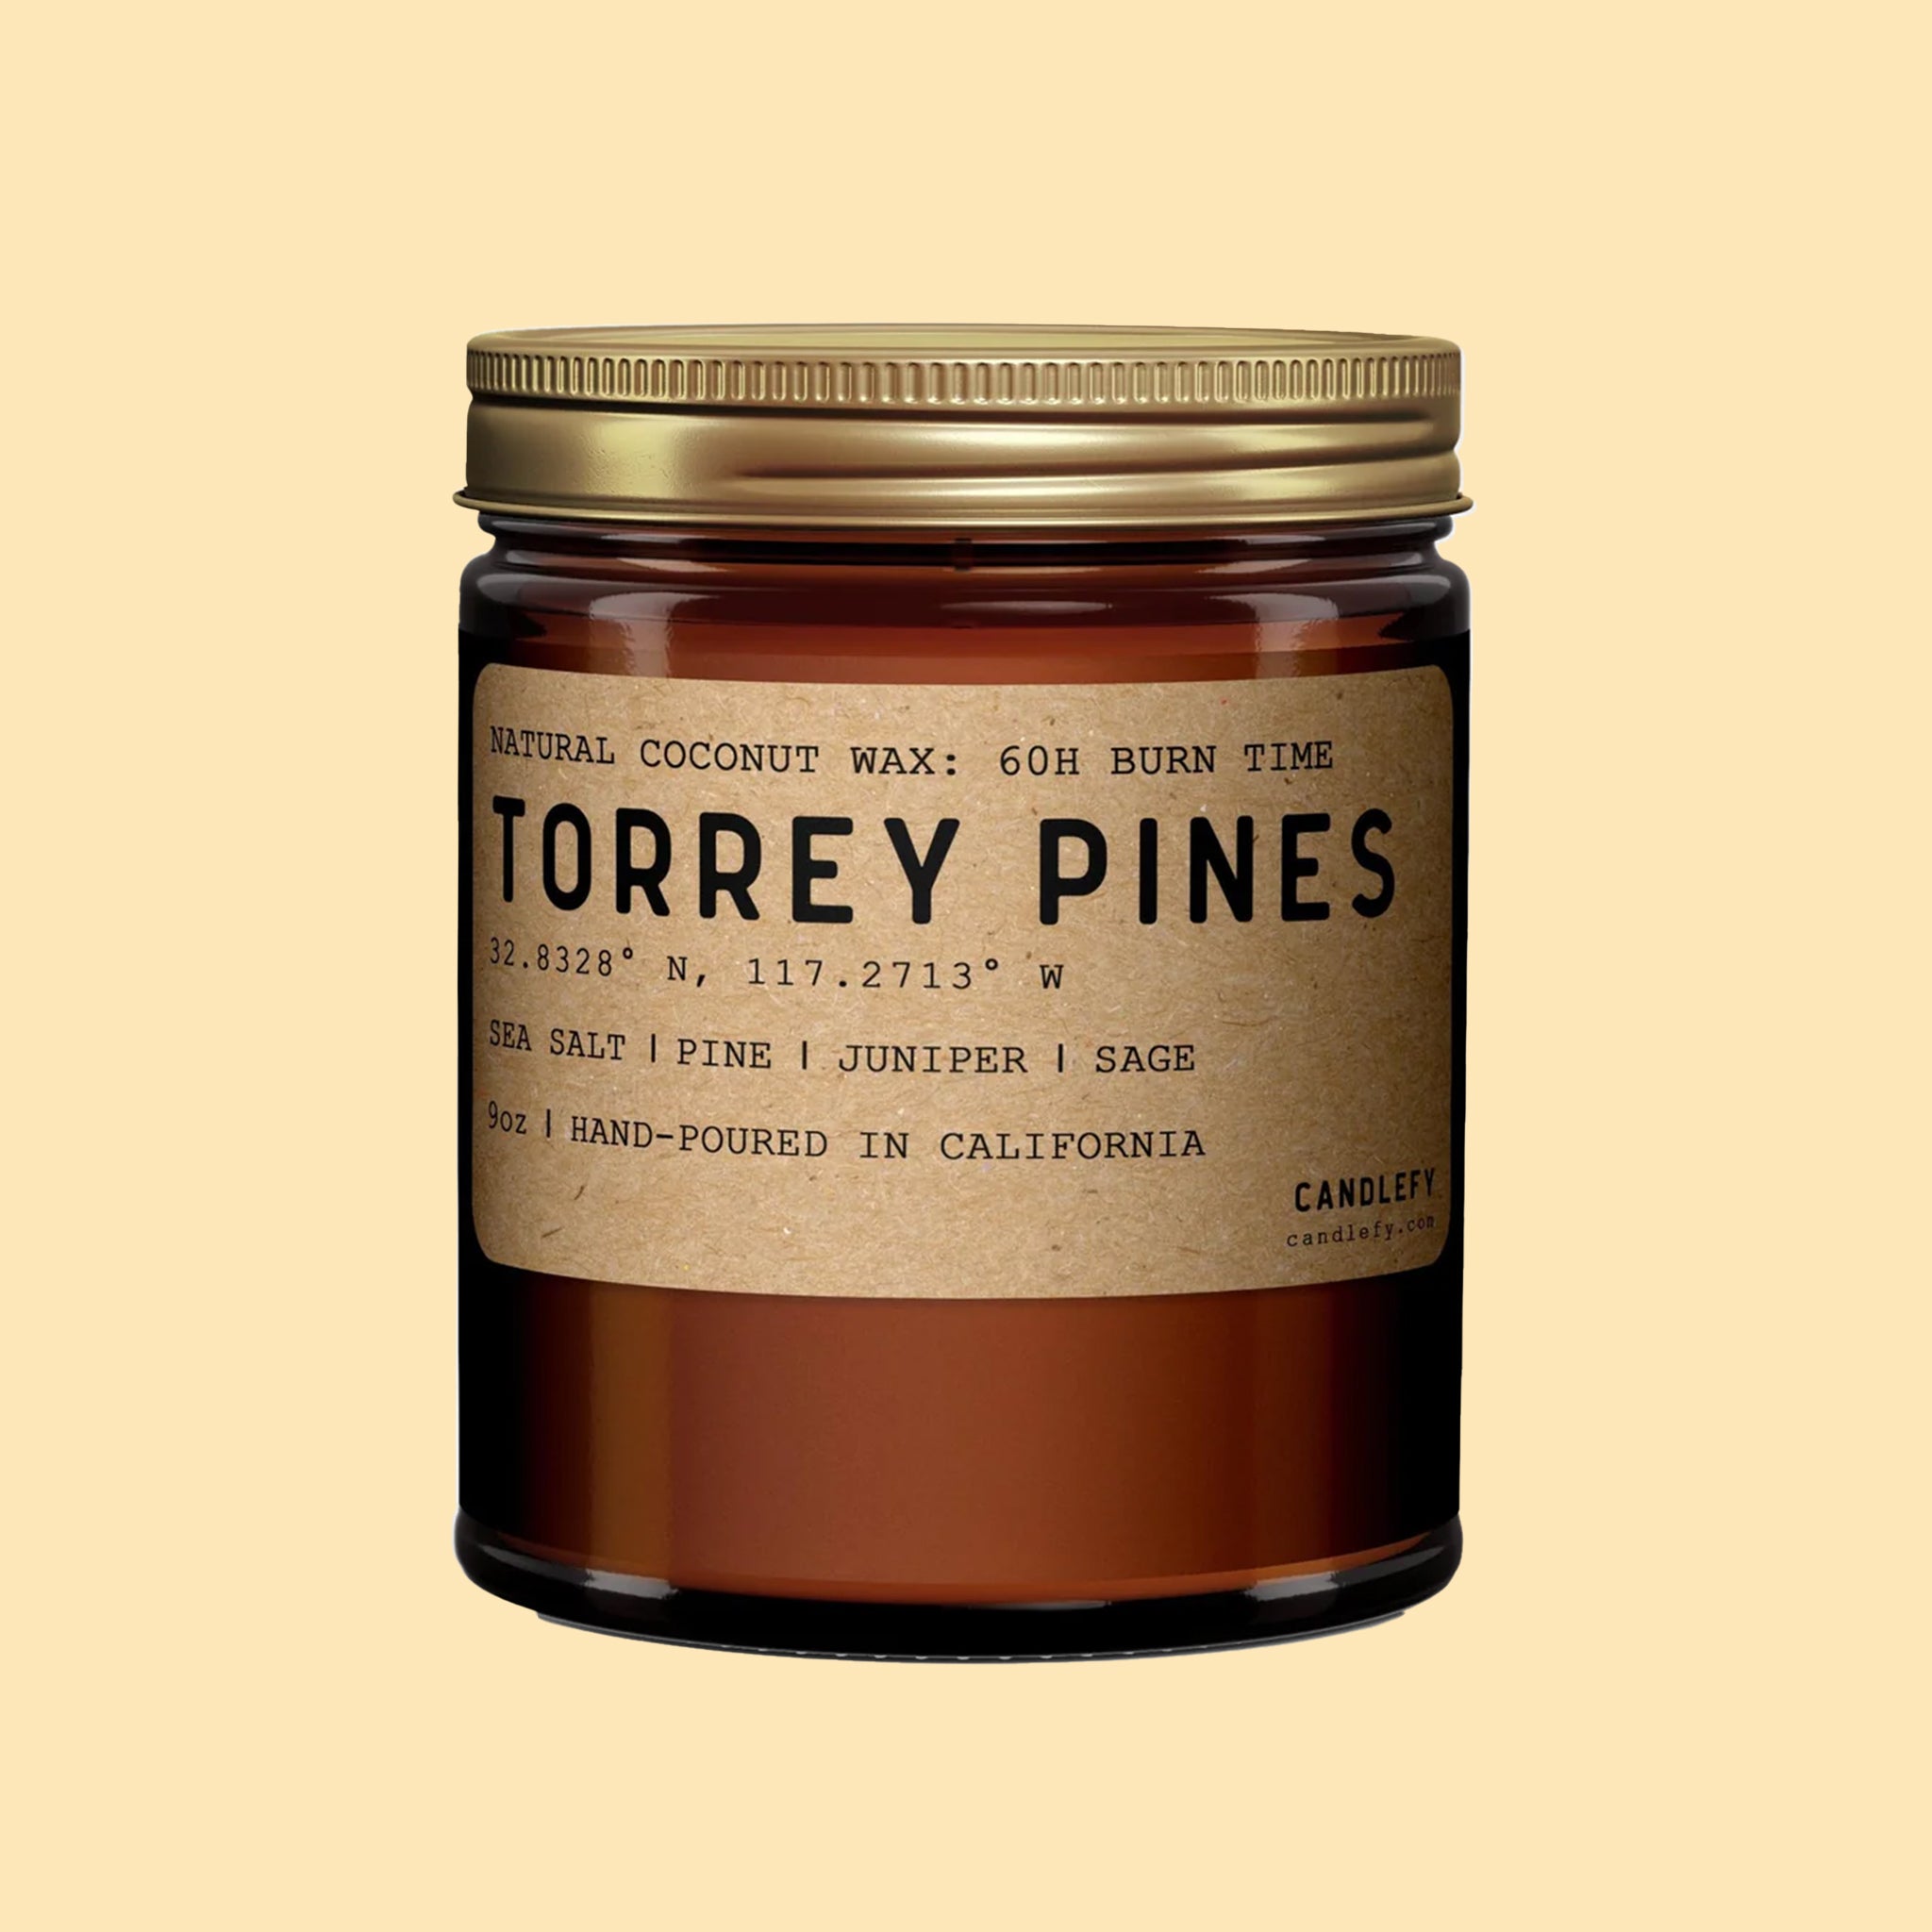 On a tan background is a brown glass jar candle with a neutral label that reads, "Torrey Pines".